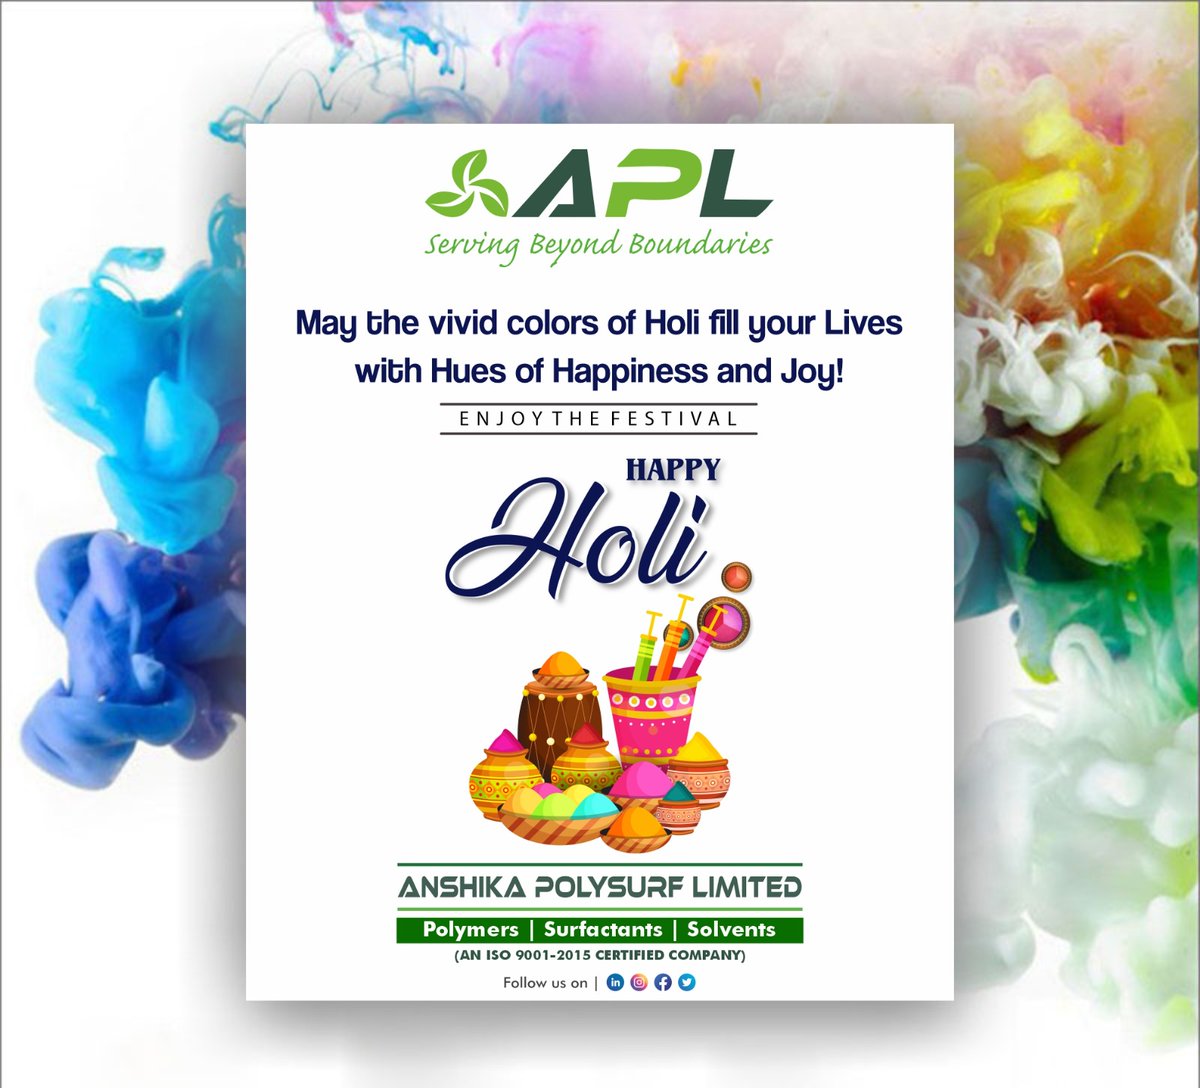 Festivals are founders of life and the Holi is the best exponent of it. So, enjoy the festival of colors. 
#Anshikapolysurf #APL #surfactants #Polymers #Solvent #specialitychemicals #chemicalindustry #Happyholi